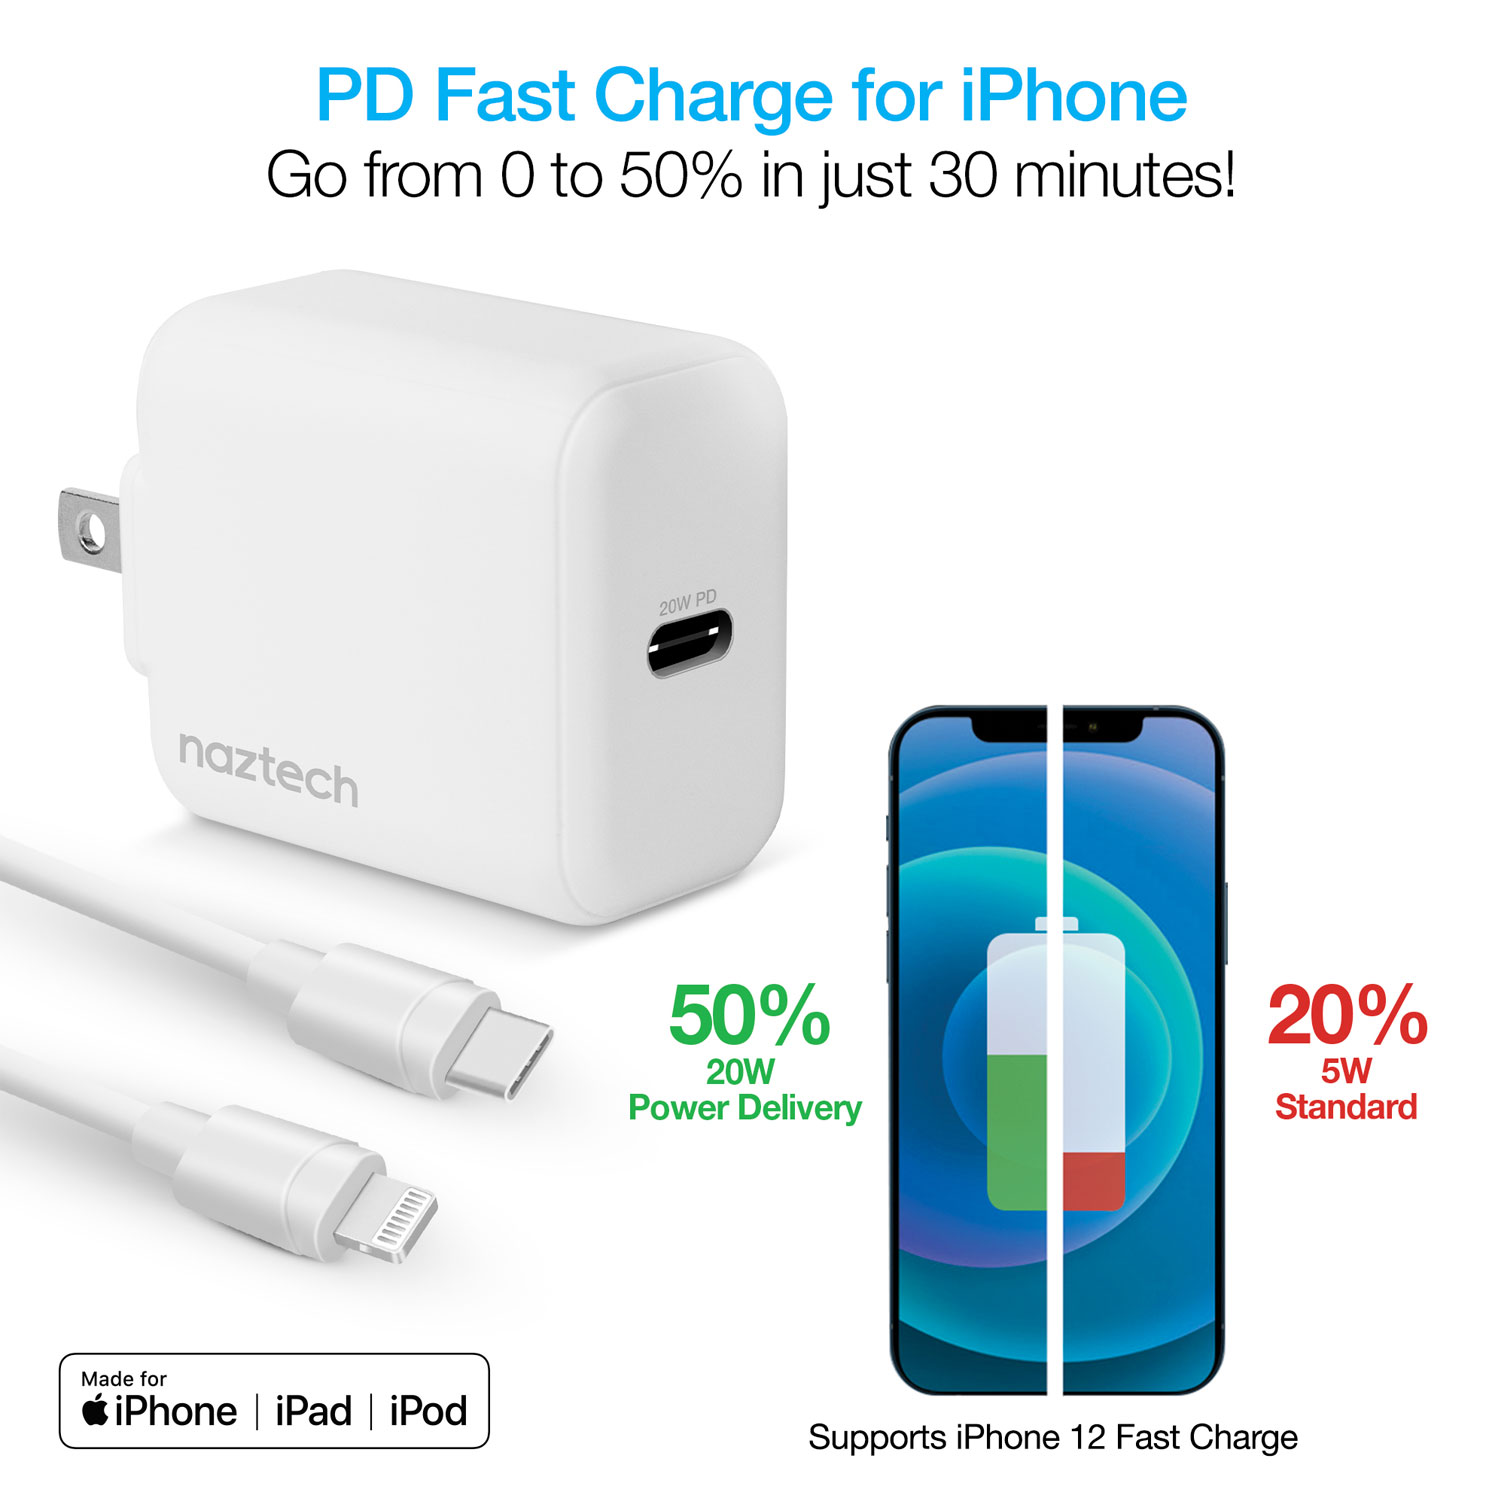 Naztech 20W PD Wall Charger + USB-C to USB-C 4ft Cbl